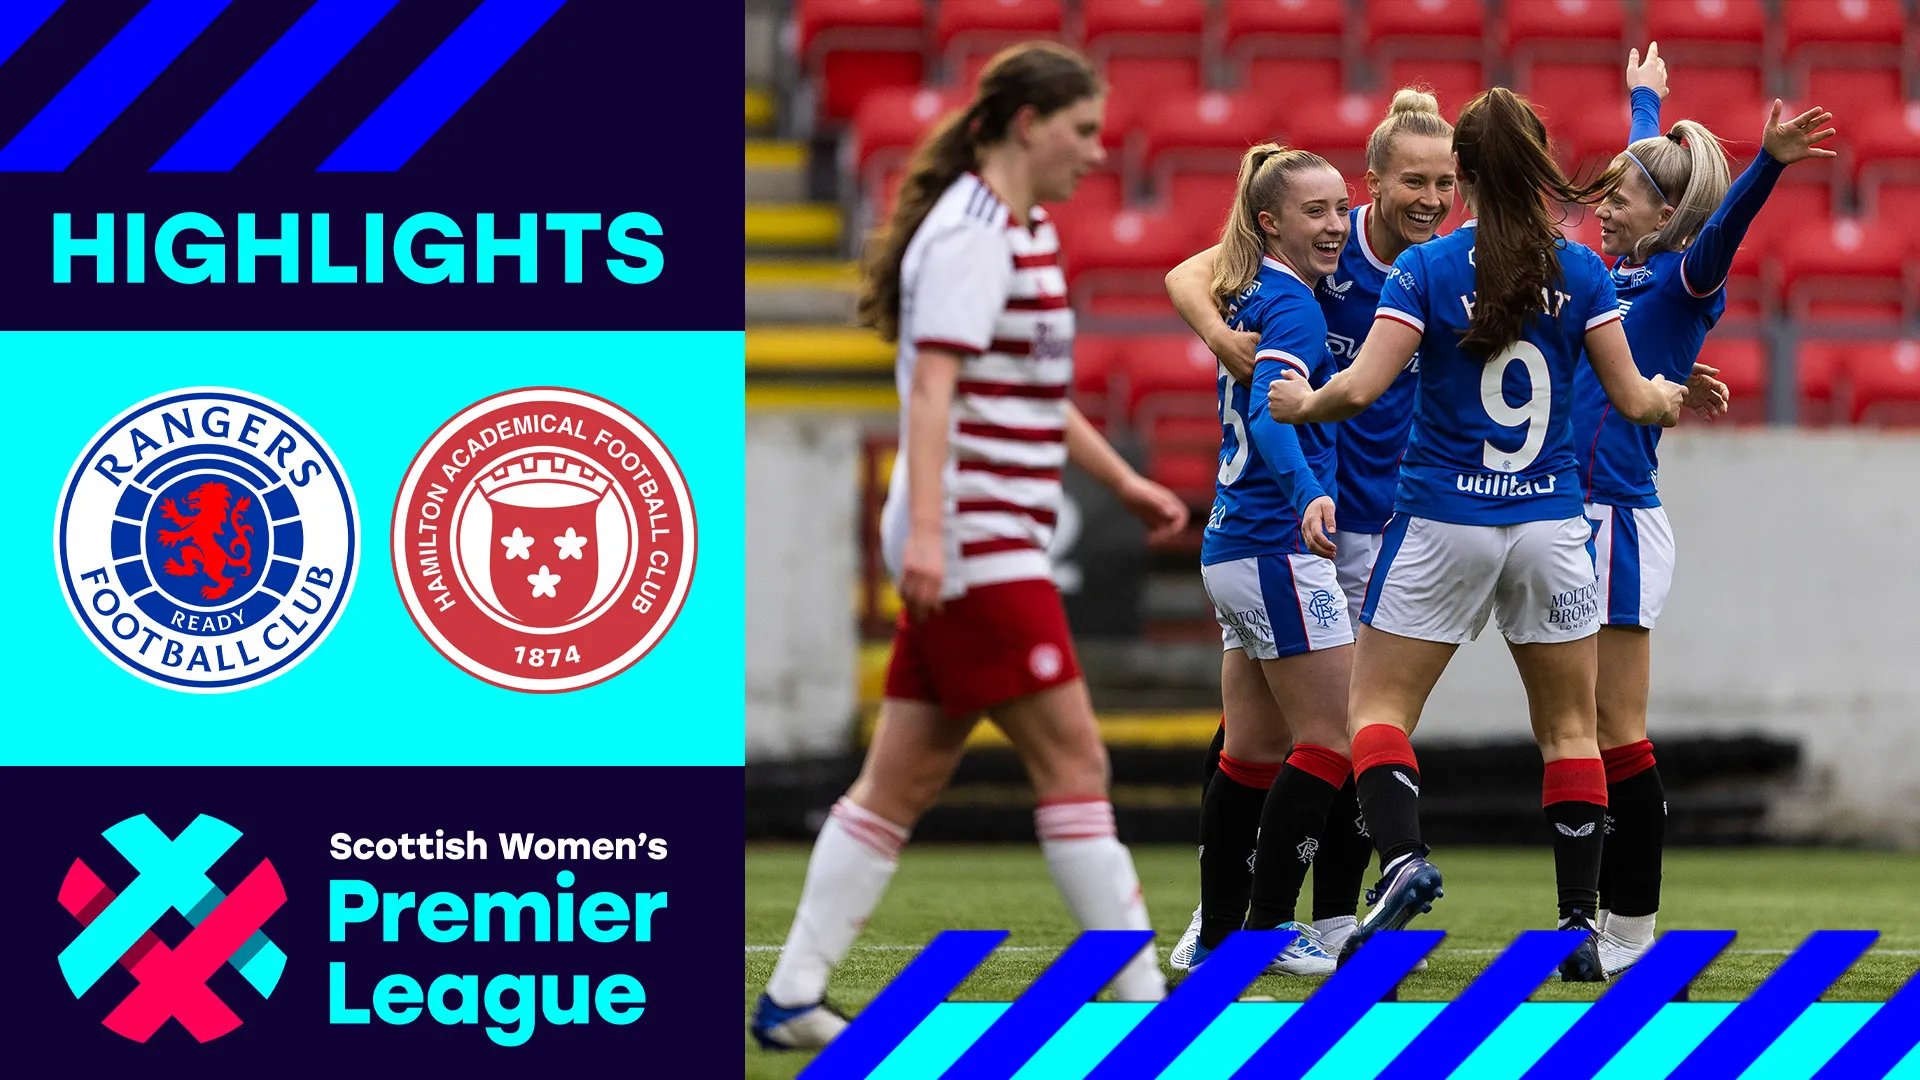 Image for Rangers 6-0 Hamilton Academical | Gers comfortably see off Accies | SWPL